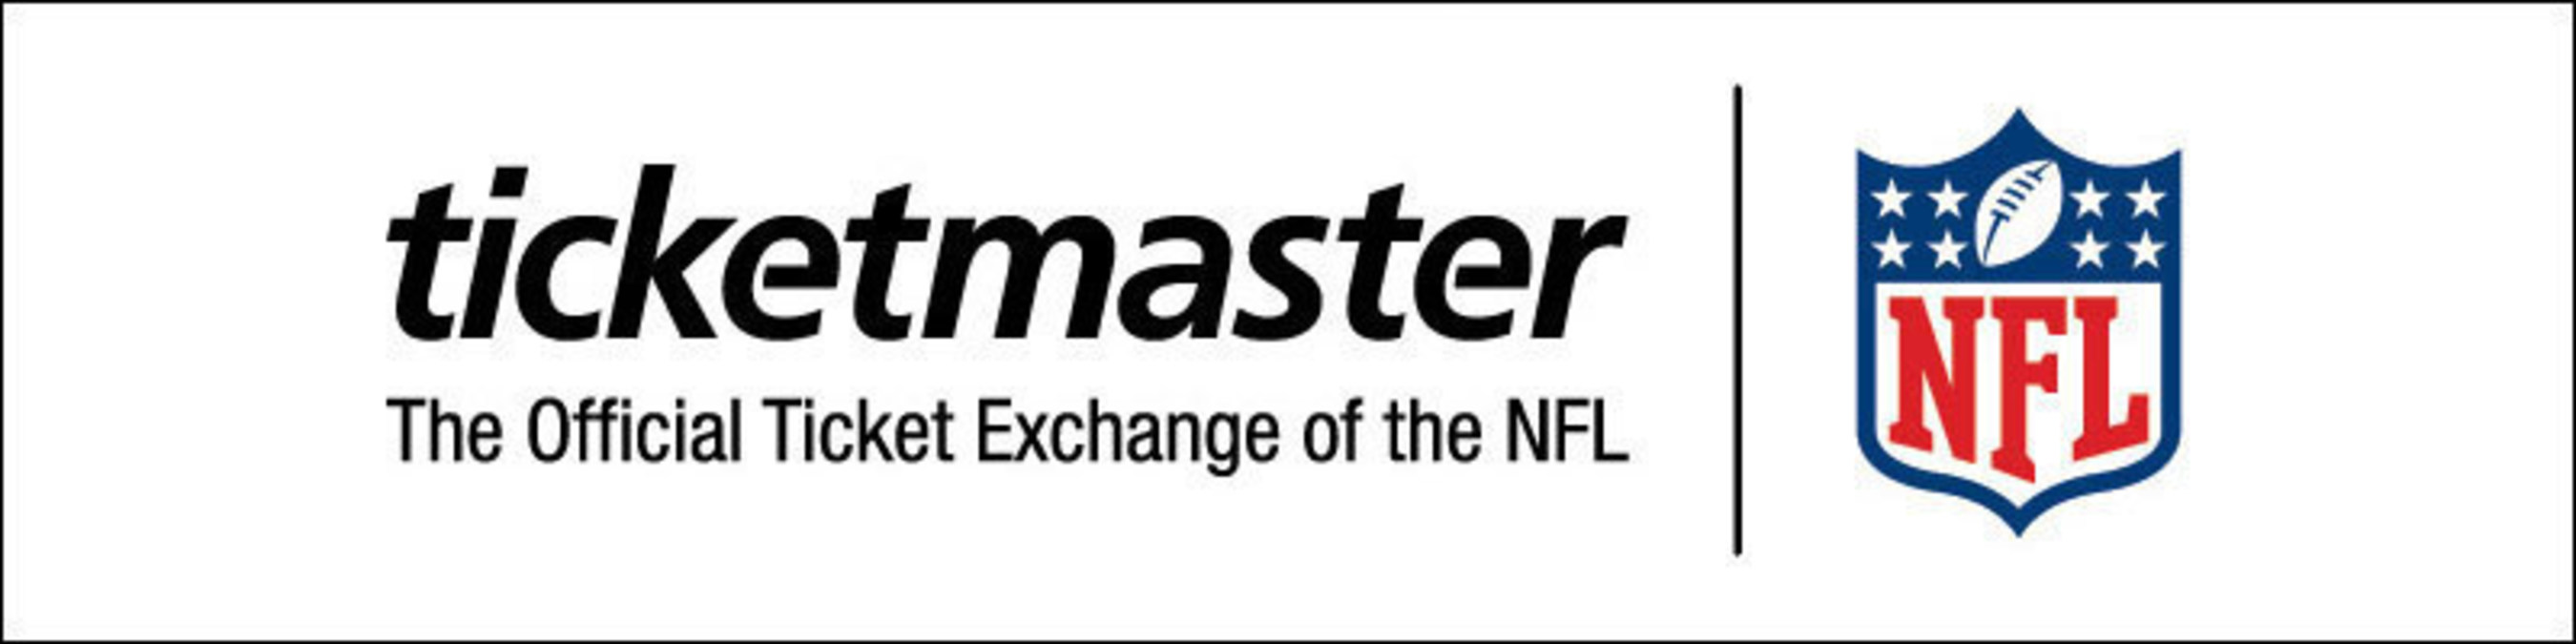 NFL Hall of Fame quarterback Troy Aikman teams with Ticketmaster and NFL Ticket Exchange, the Official Ticket Exchange of the NFL, to help fans avoid counterfiet tickets.